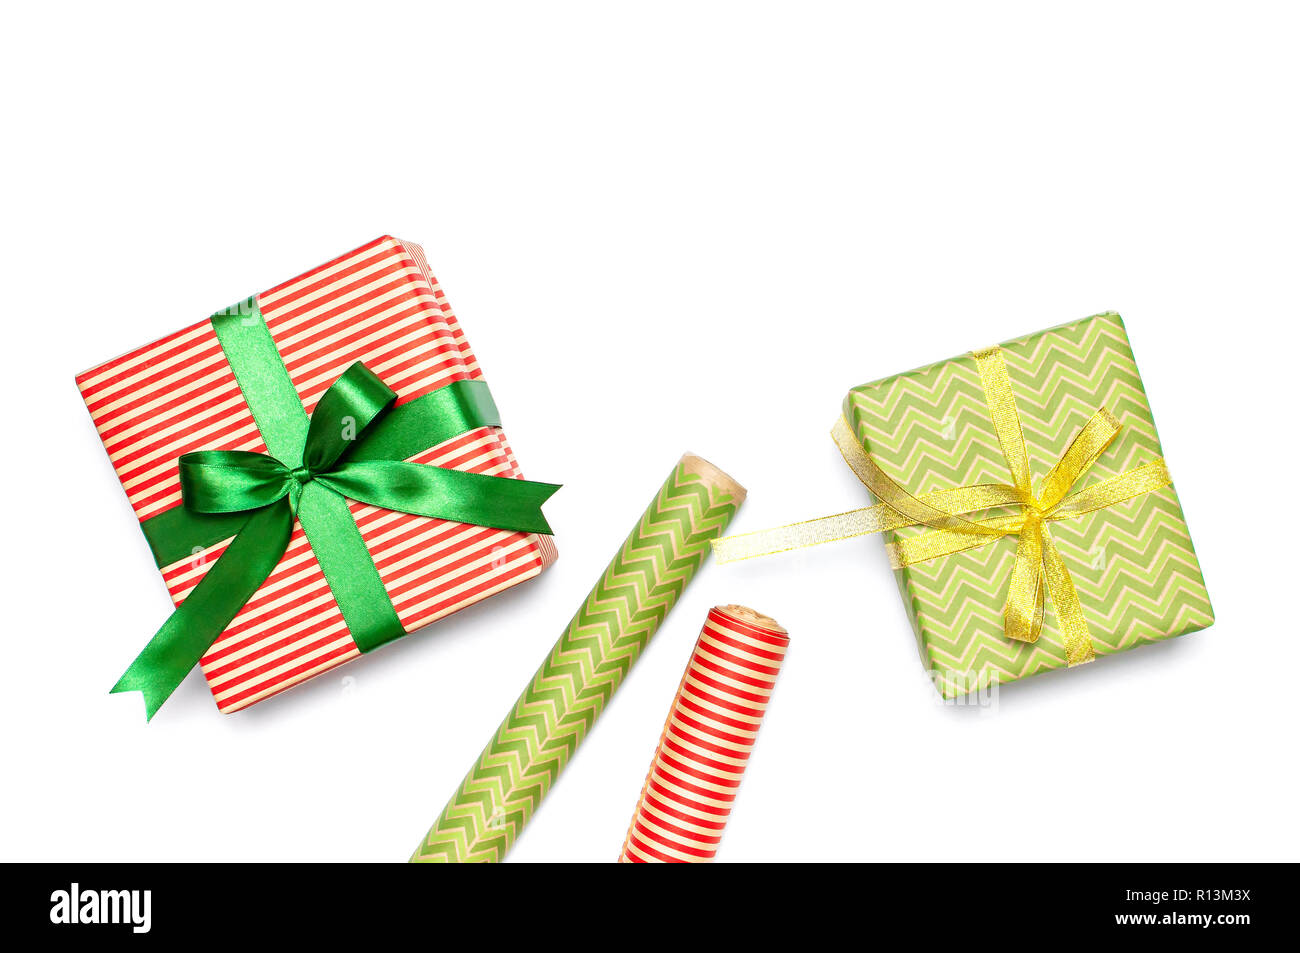 https://c8.alamy.com/comp/R13M3X/gift-boxes-packing-paper-scissors-ribbon-on-white-background-festive-background-congratulation-gift-wrapping-christmas-and-new-year-theme-flat-R13M3X.jpg